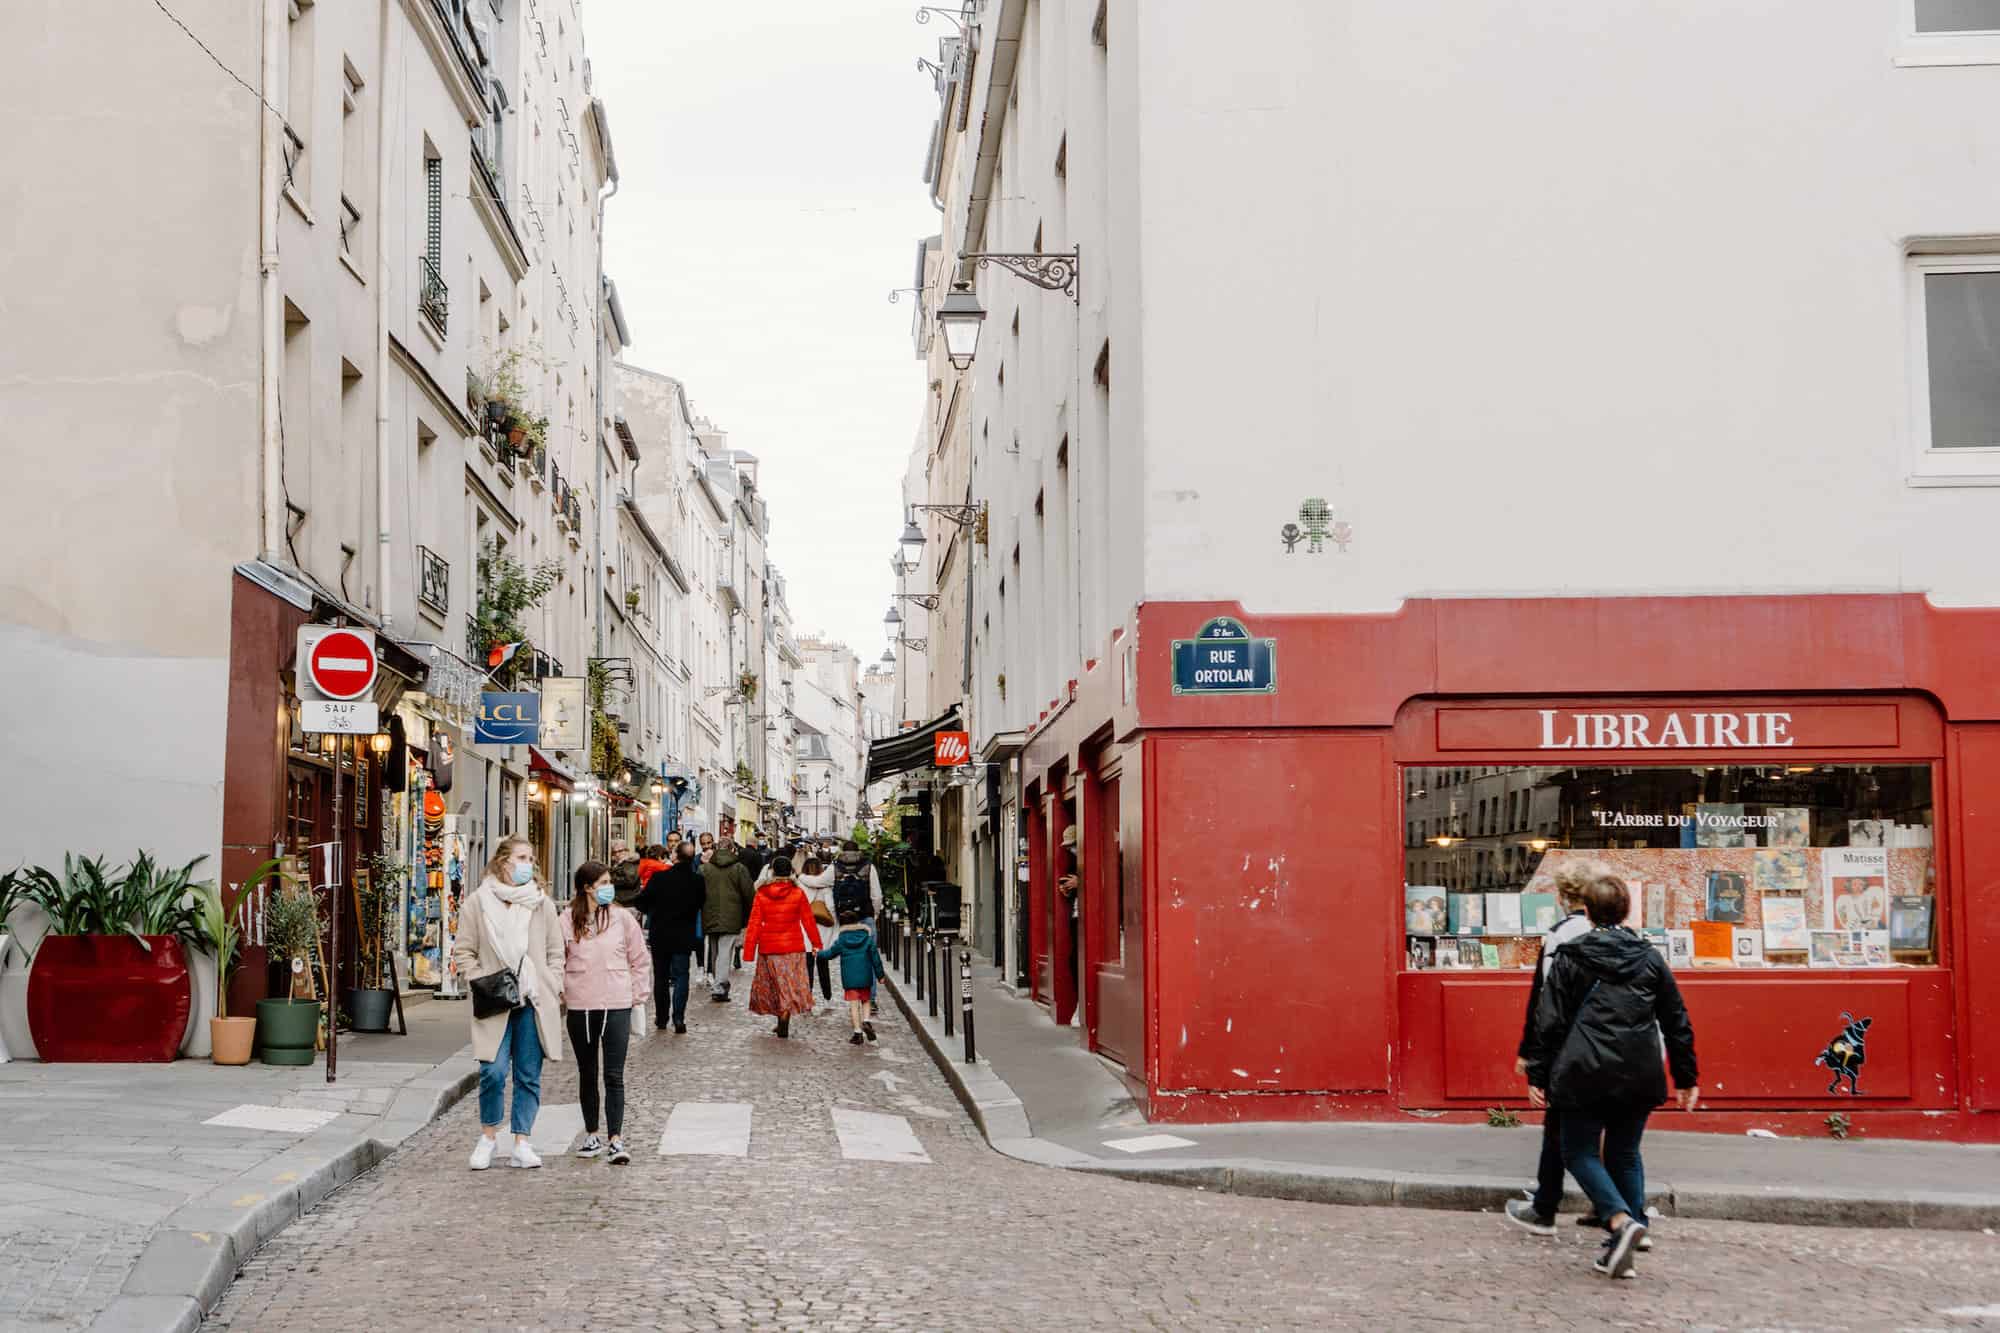 A street in Paris. There is a red bookstore with the word "Librarie" written in white on it to the right. There are several people walking in the street, all who are visible are wearing face masks. There is a do not enter street sign visible to the left. The surrounding buildings are white.